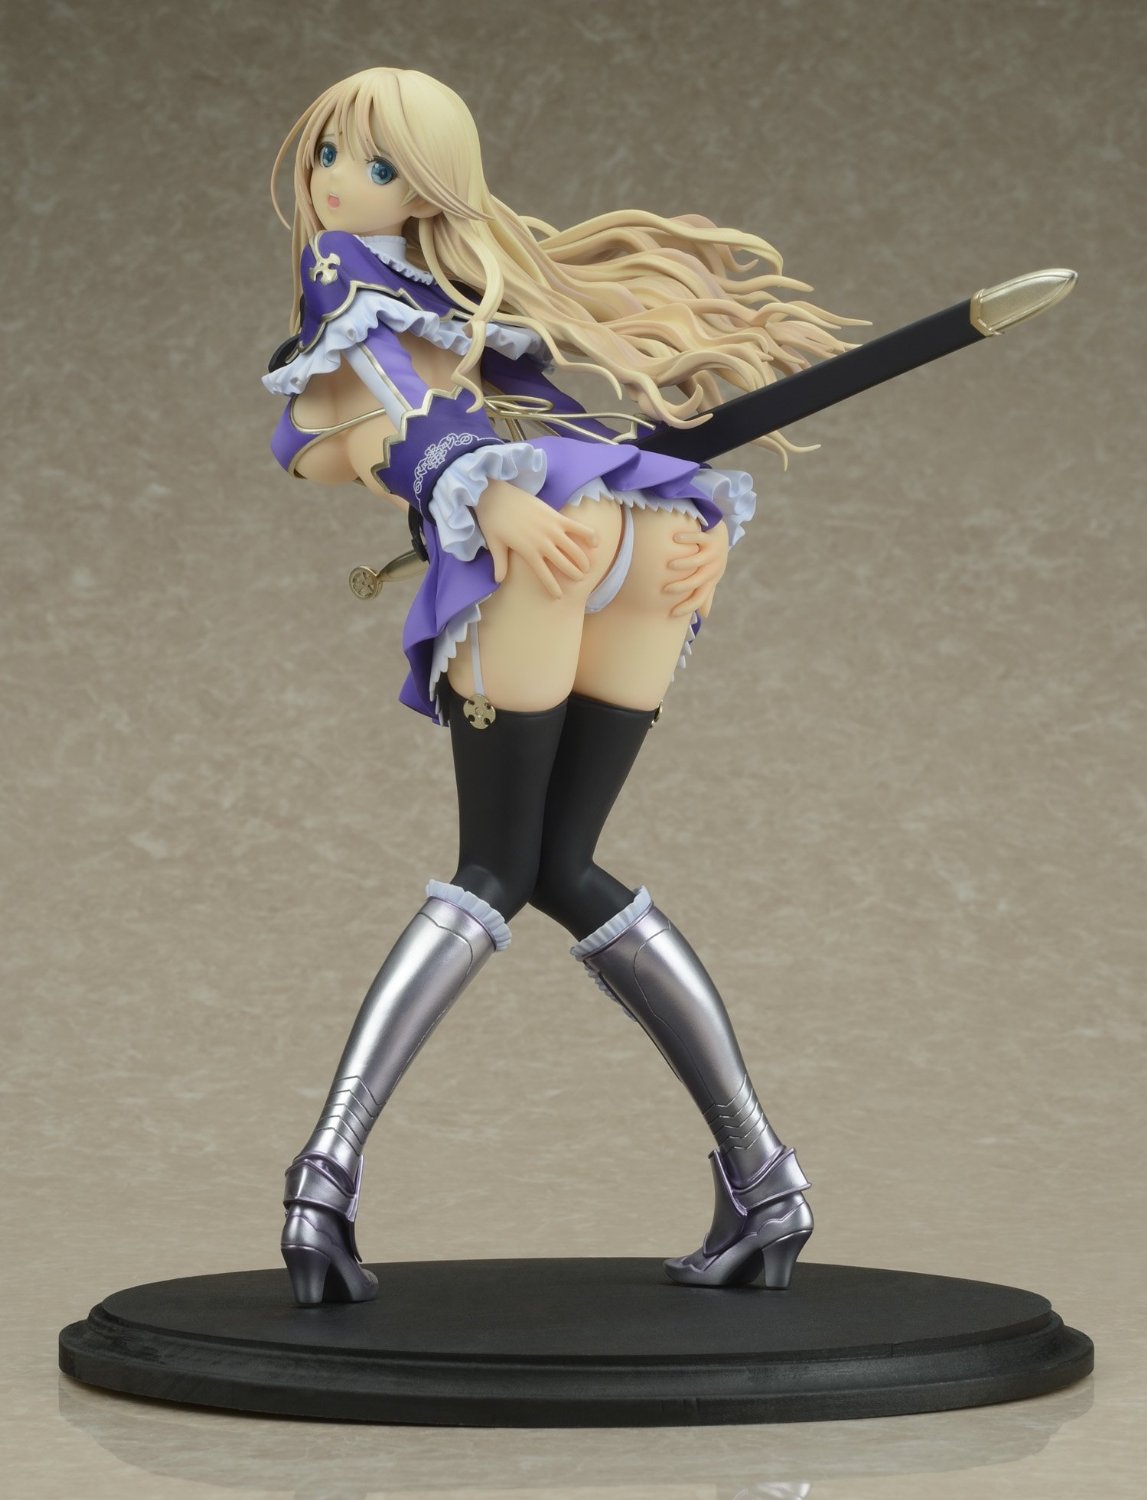 1/6 scale Arianrhod PVC figure by Dragon Toy.